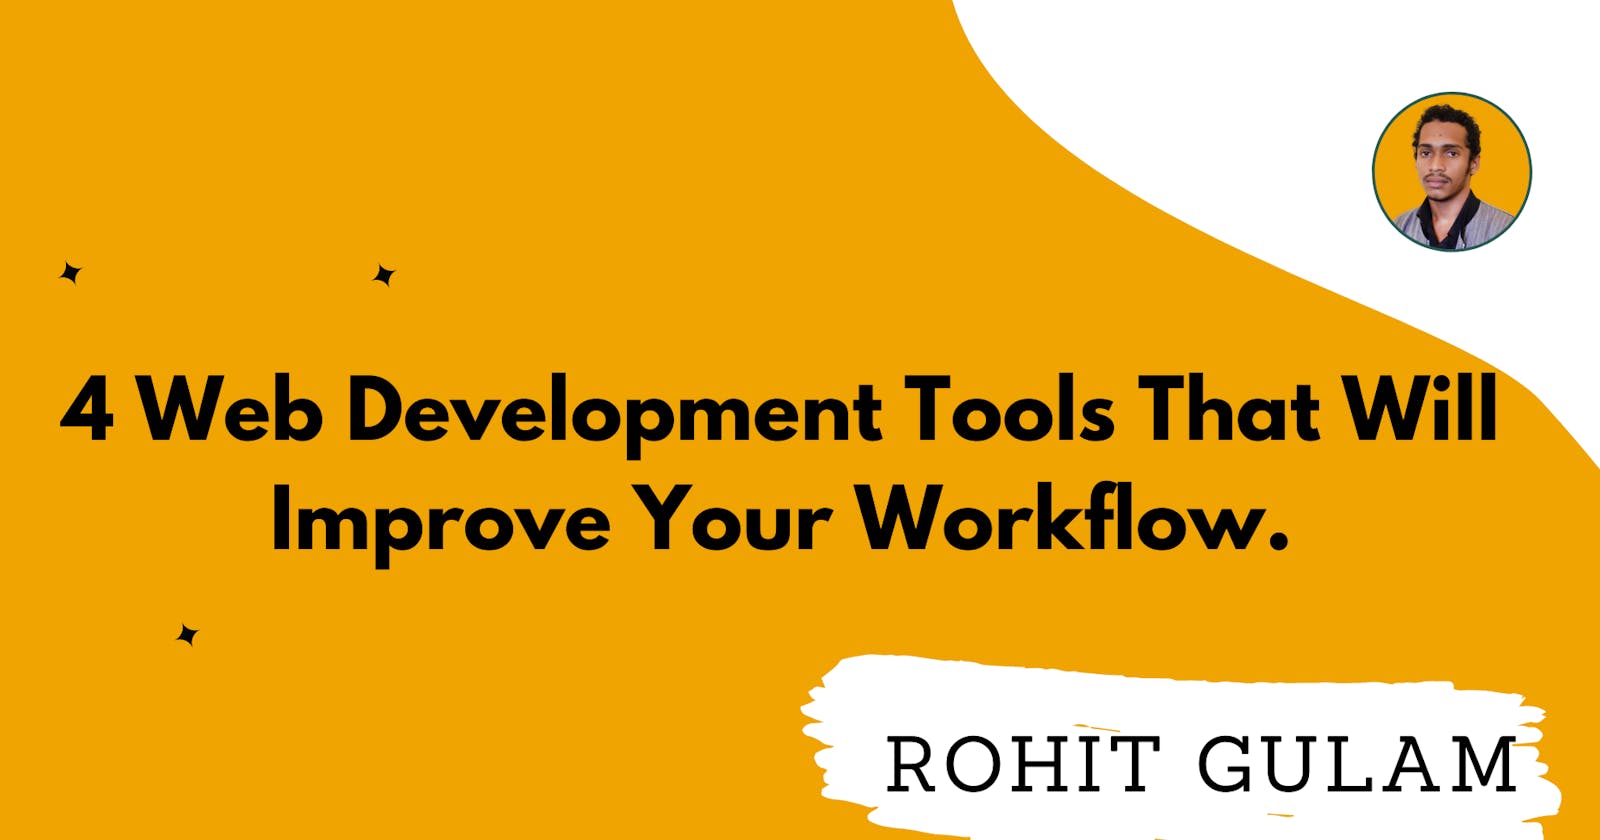 4 Useful Web Development Tools That Will Improve Your Workflow